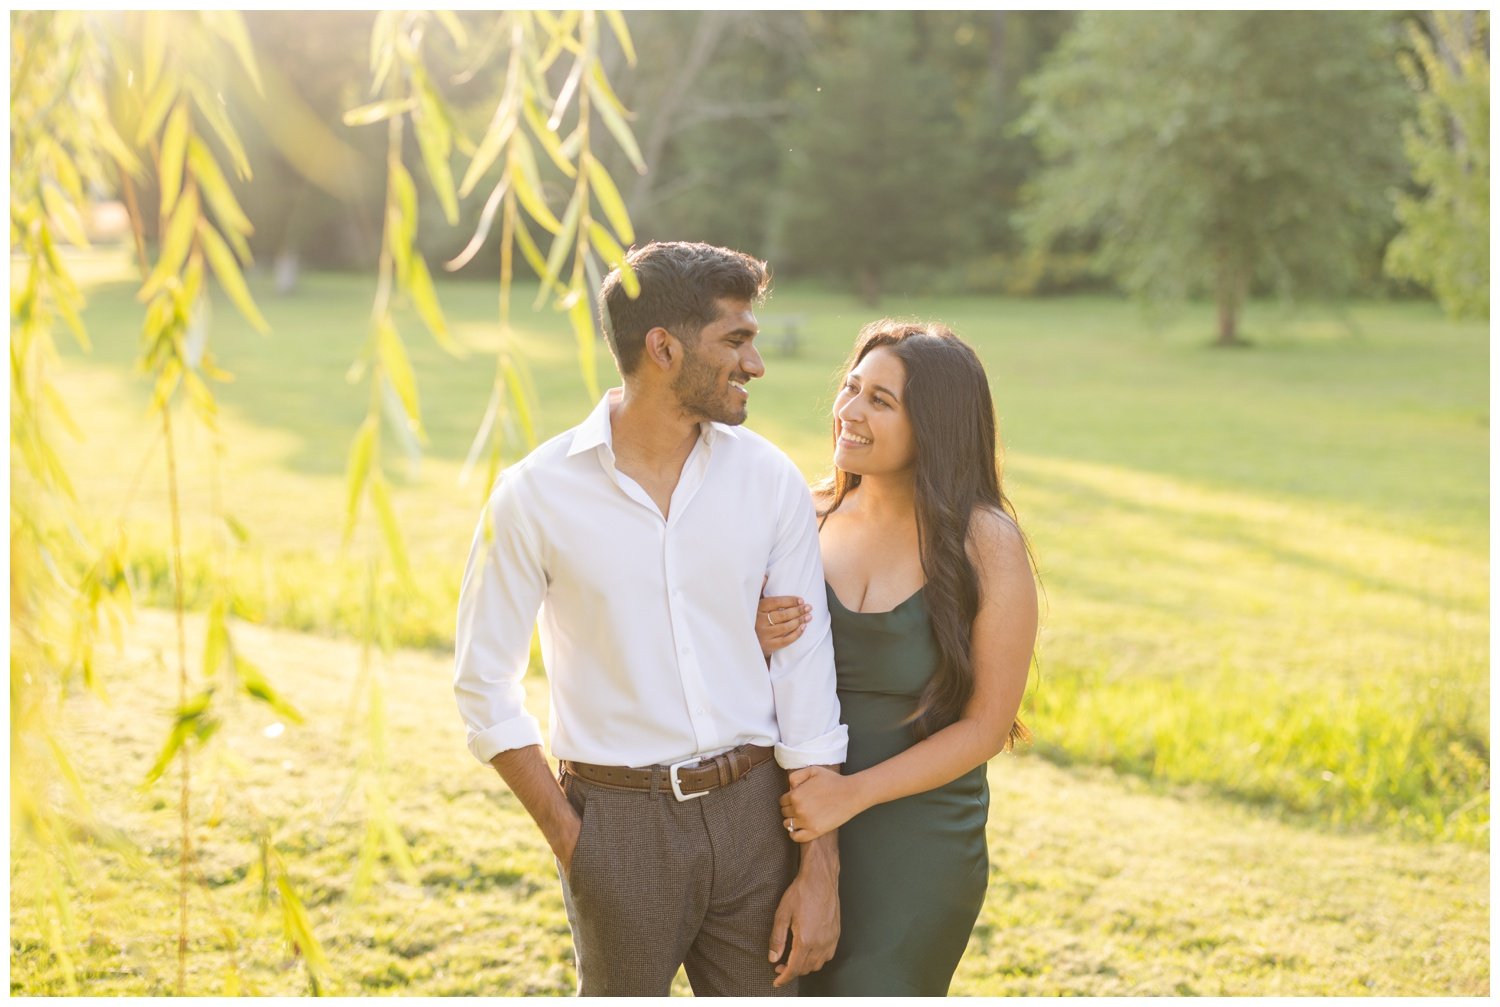 French-Creek-Park-PA-Summer-Lakeside-Engagement-Session-9.jpg